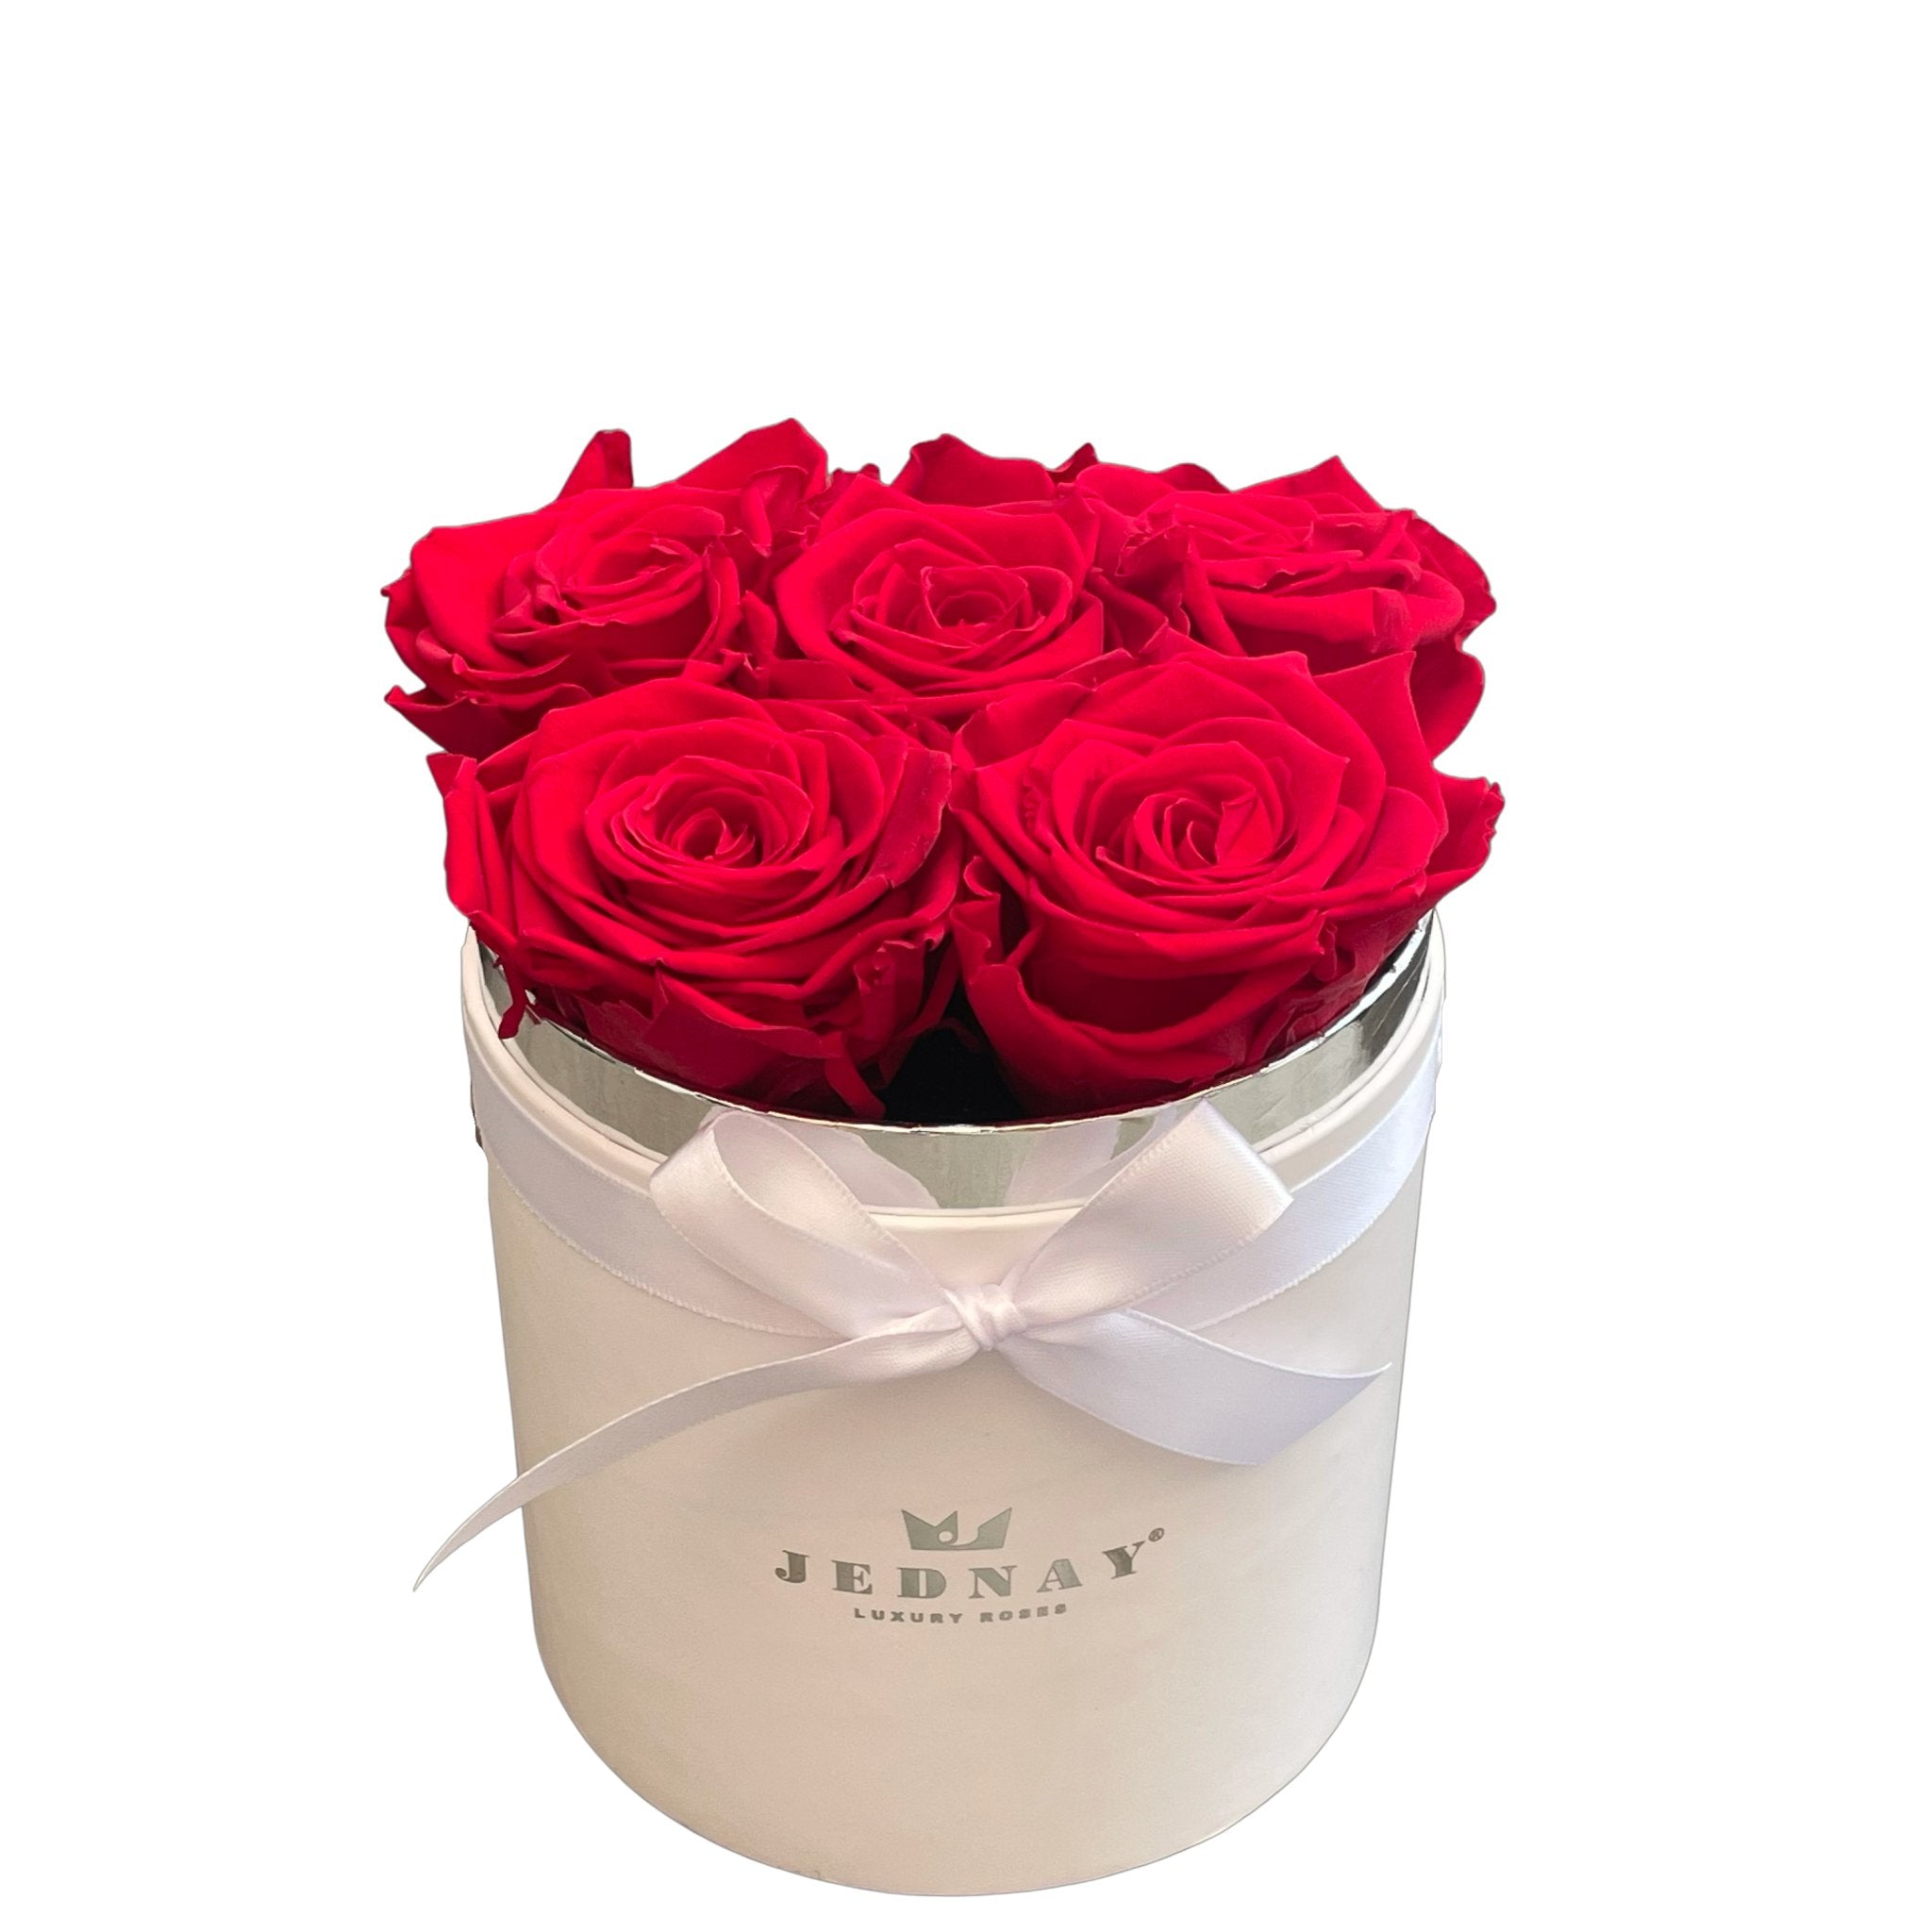 The Four - Classic Red Forever Roses - White Box - Jednay Roses